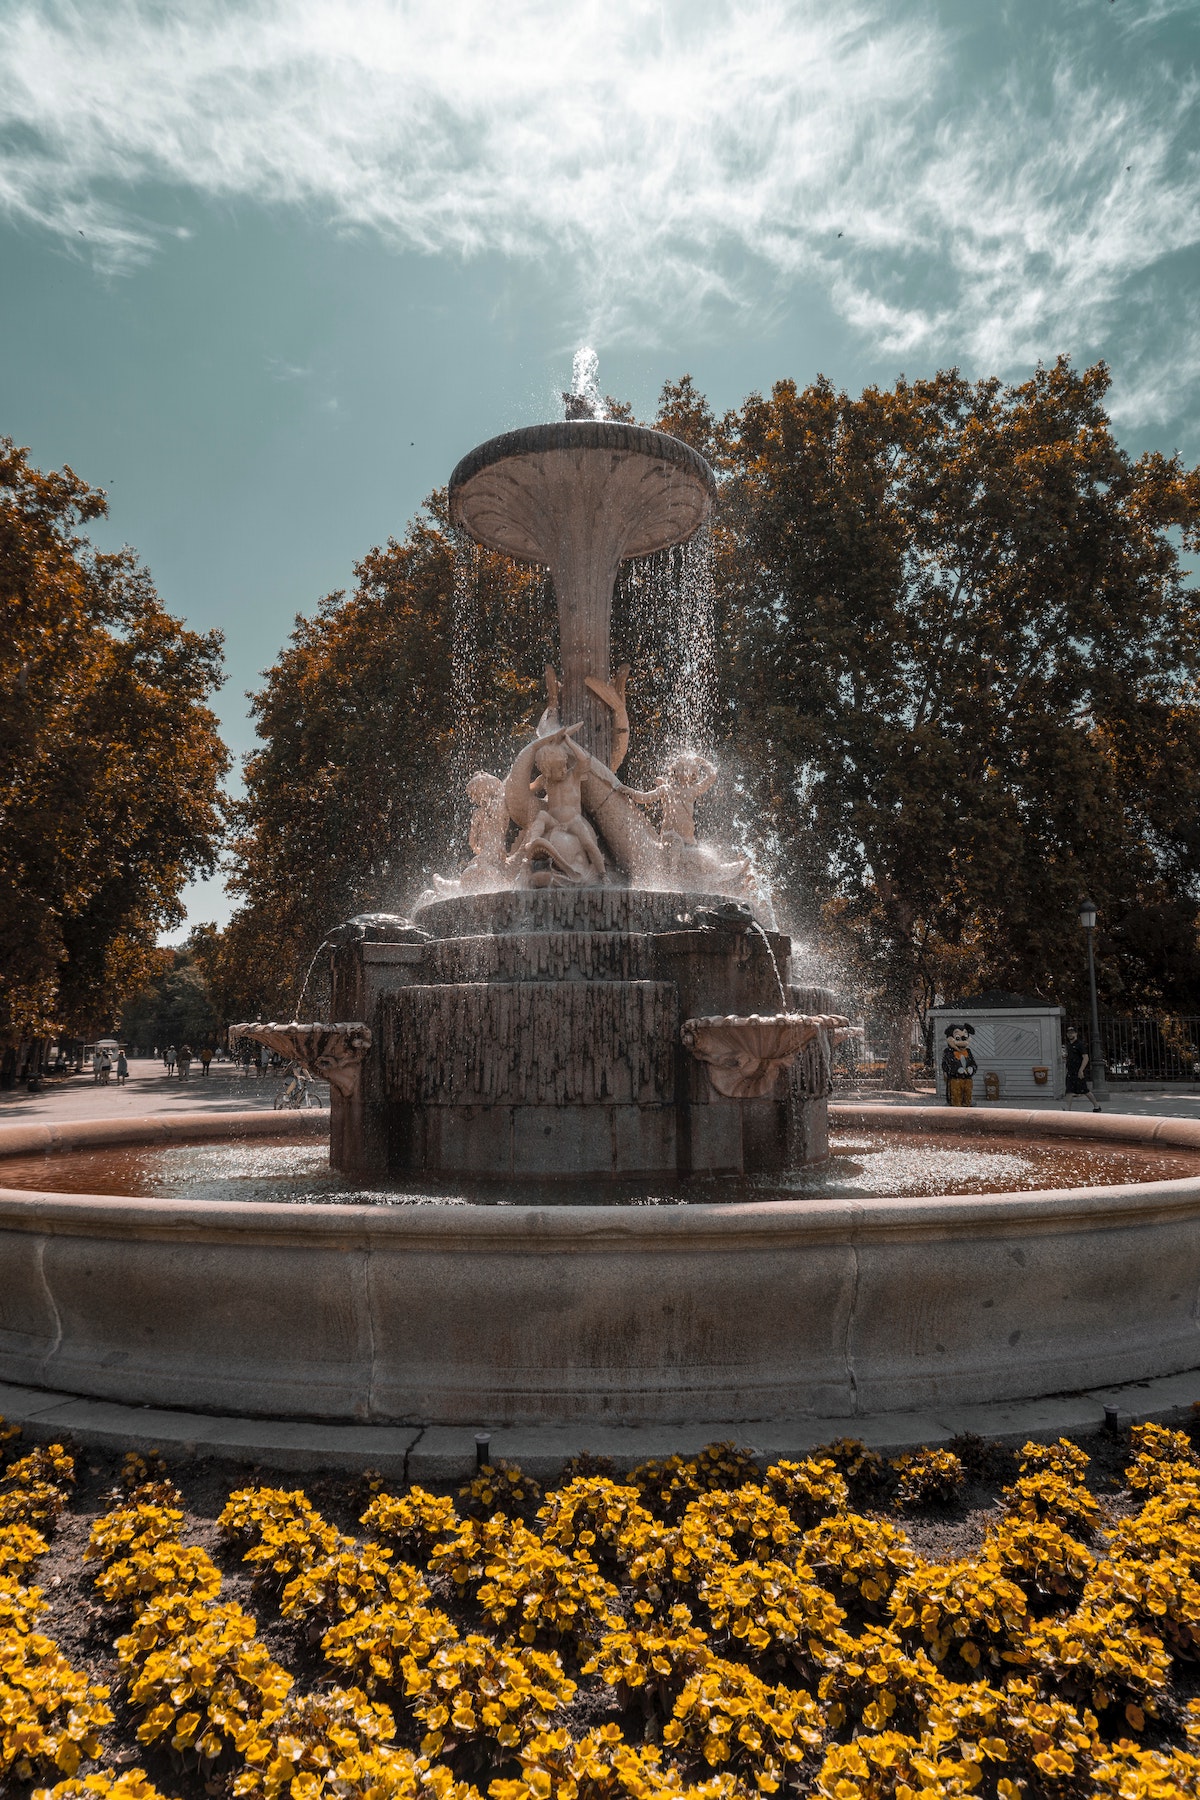 Large stone fountain in a park surrounded by yellow flowers.